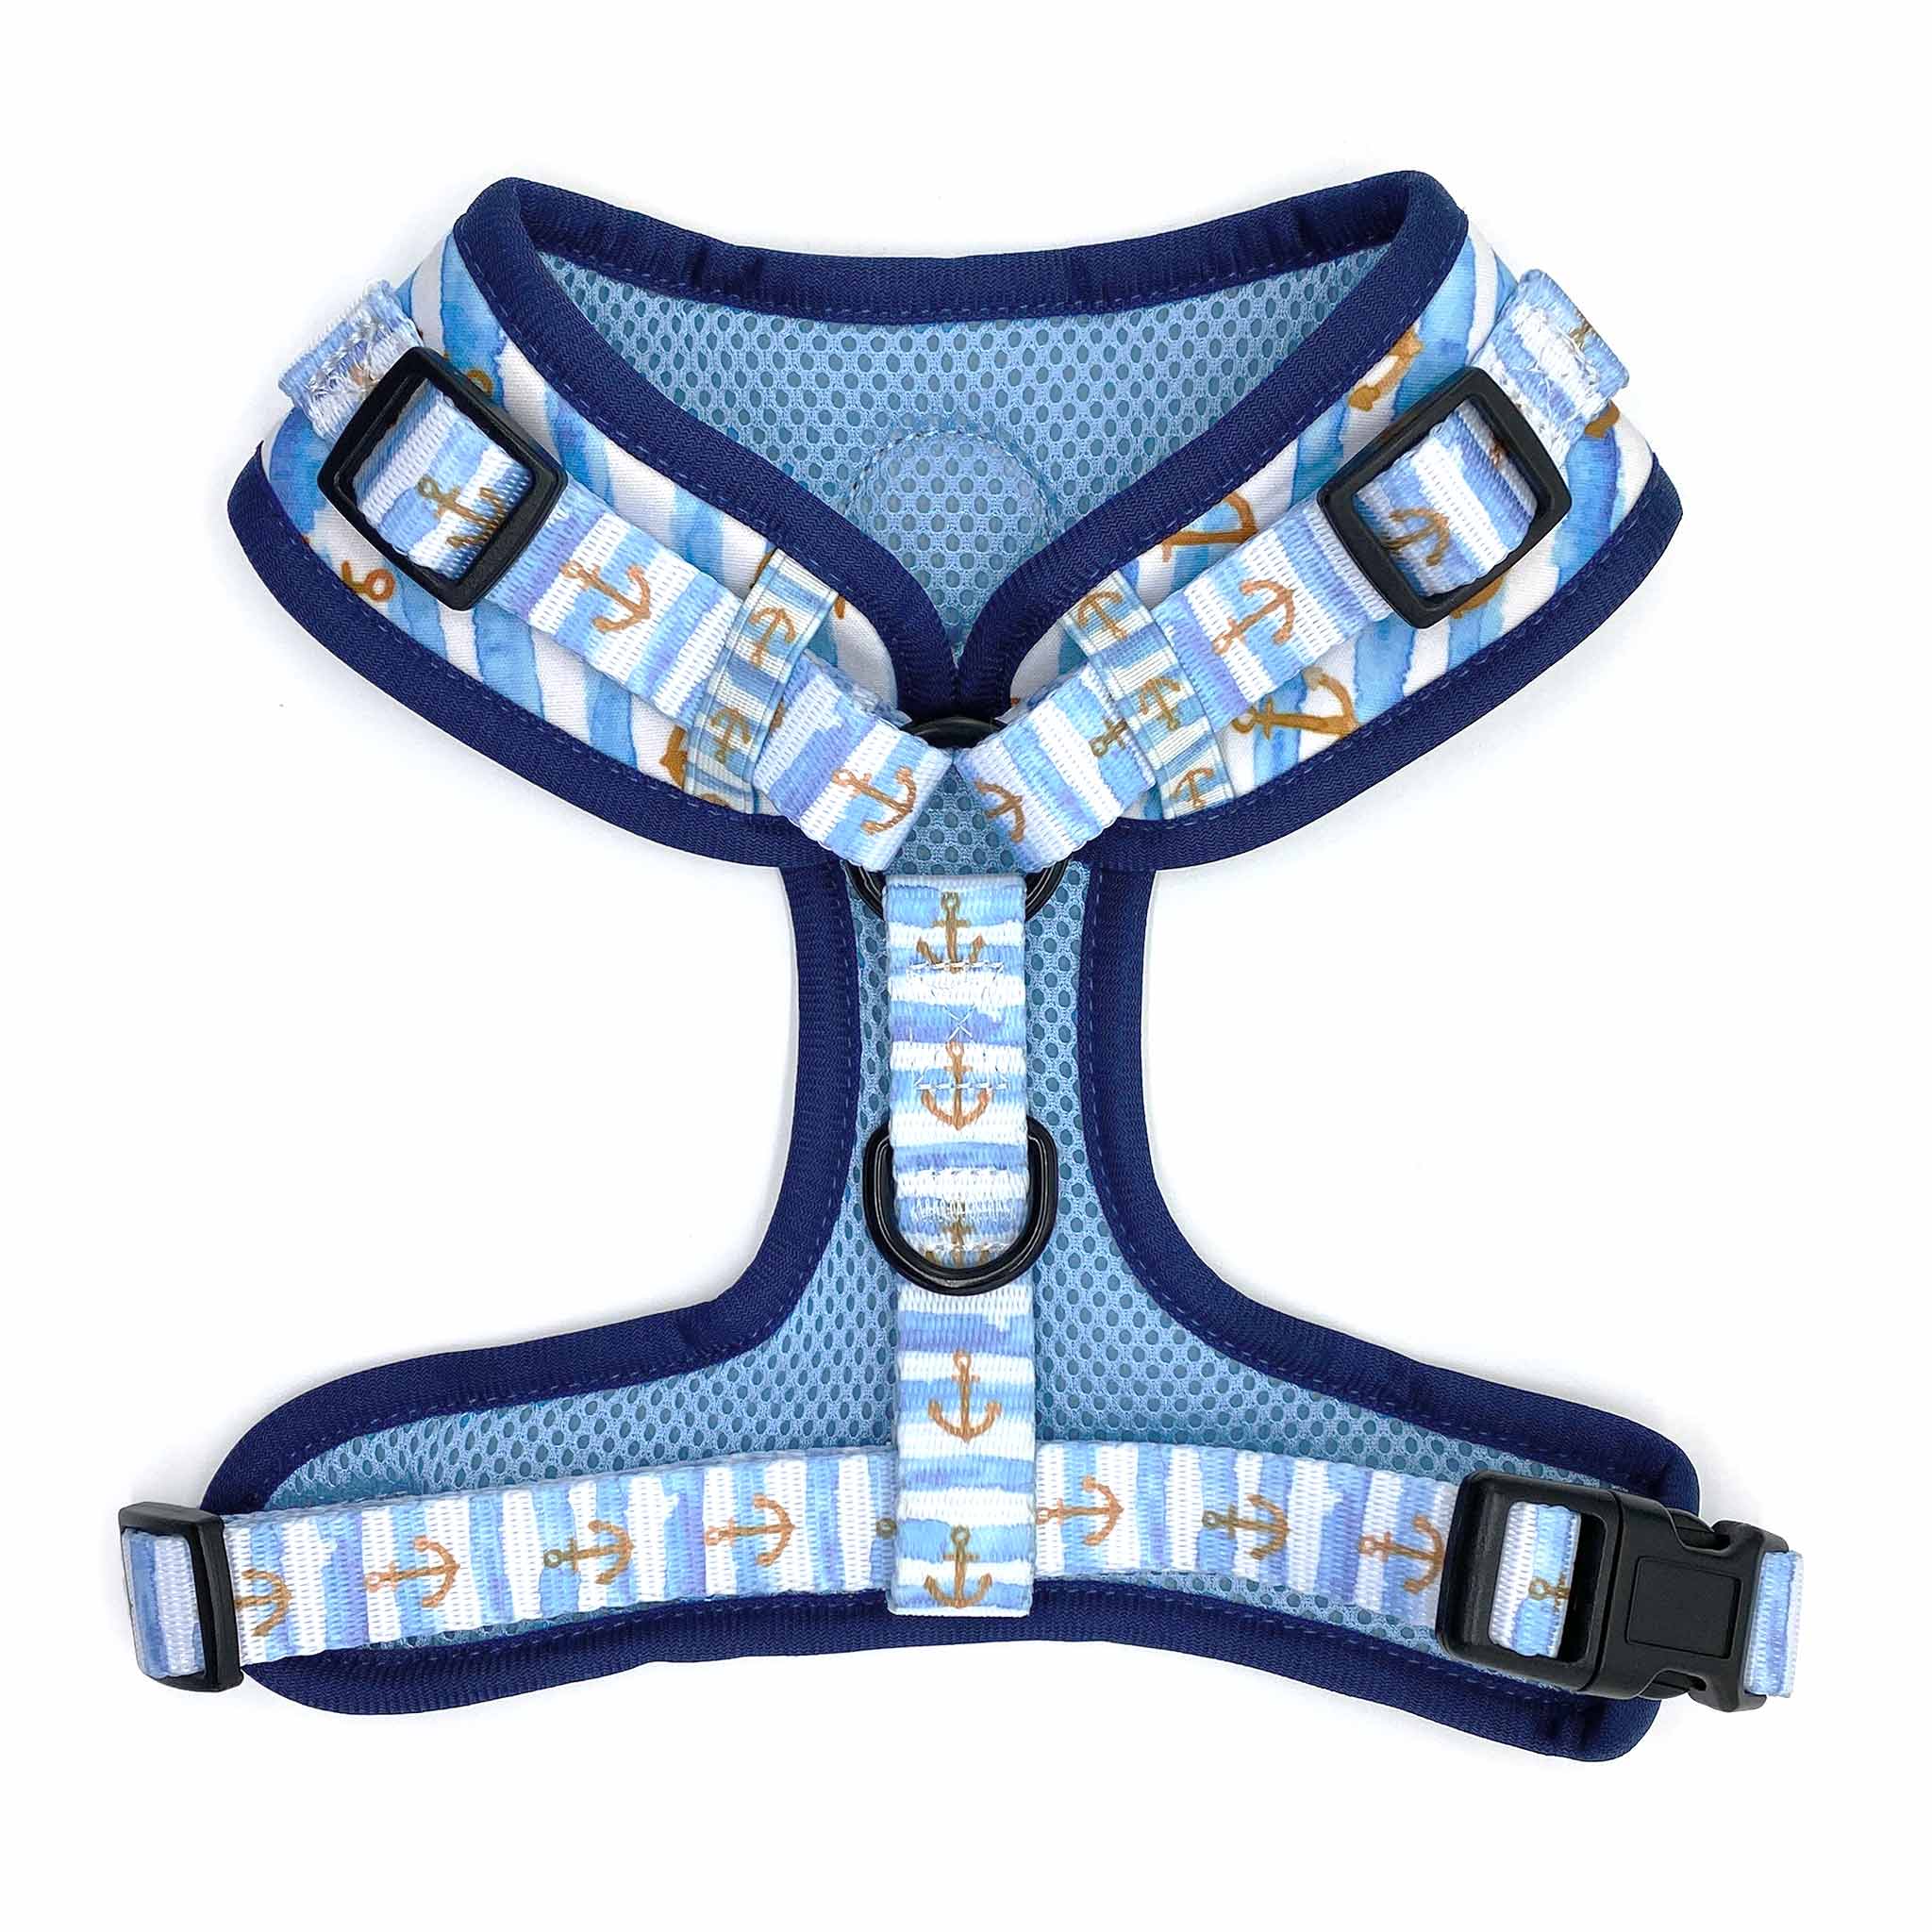 Back view of Pipco Pets adjustable dog harness with Sailor Pup anchors print pattern in blue